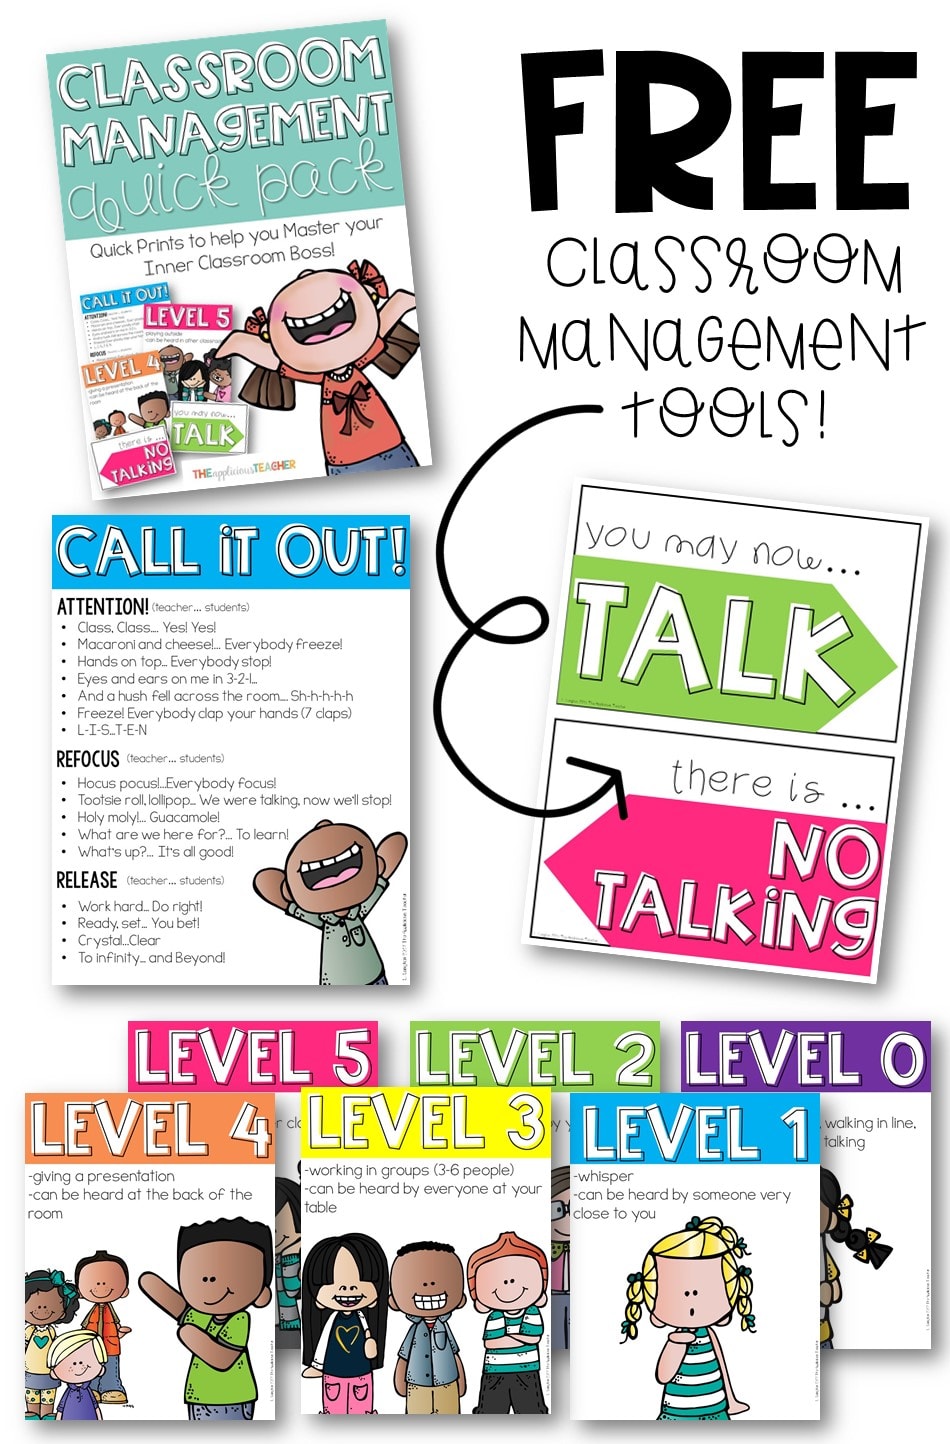 Grab these FREE classroom management posters and signs and finally wrangle all that talking! This amazing pack includes: noise level posters, a call and response reference sheet, and a no talking sign. Oh and they're FREE!